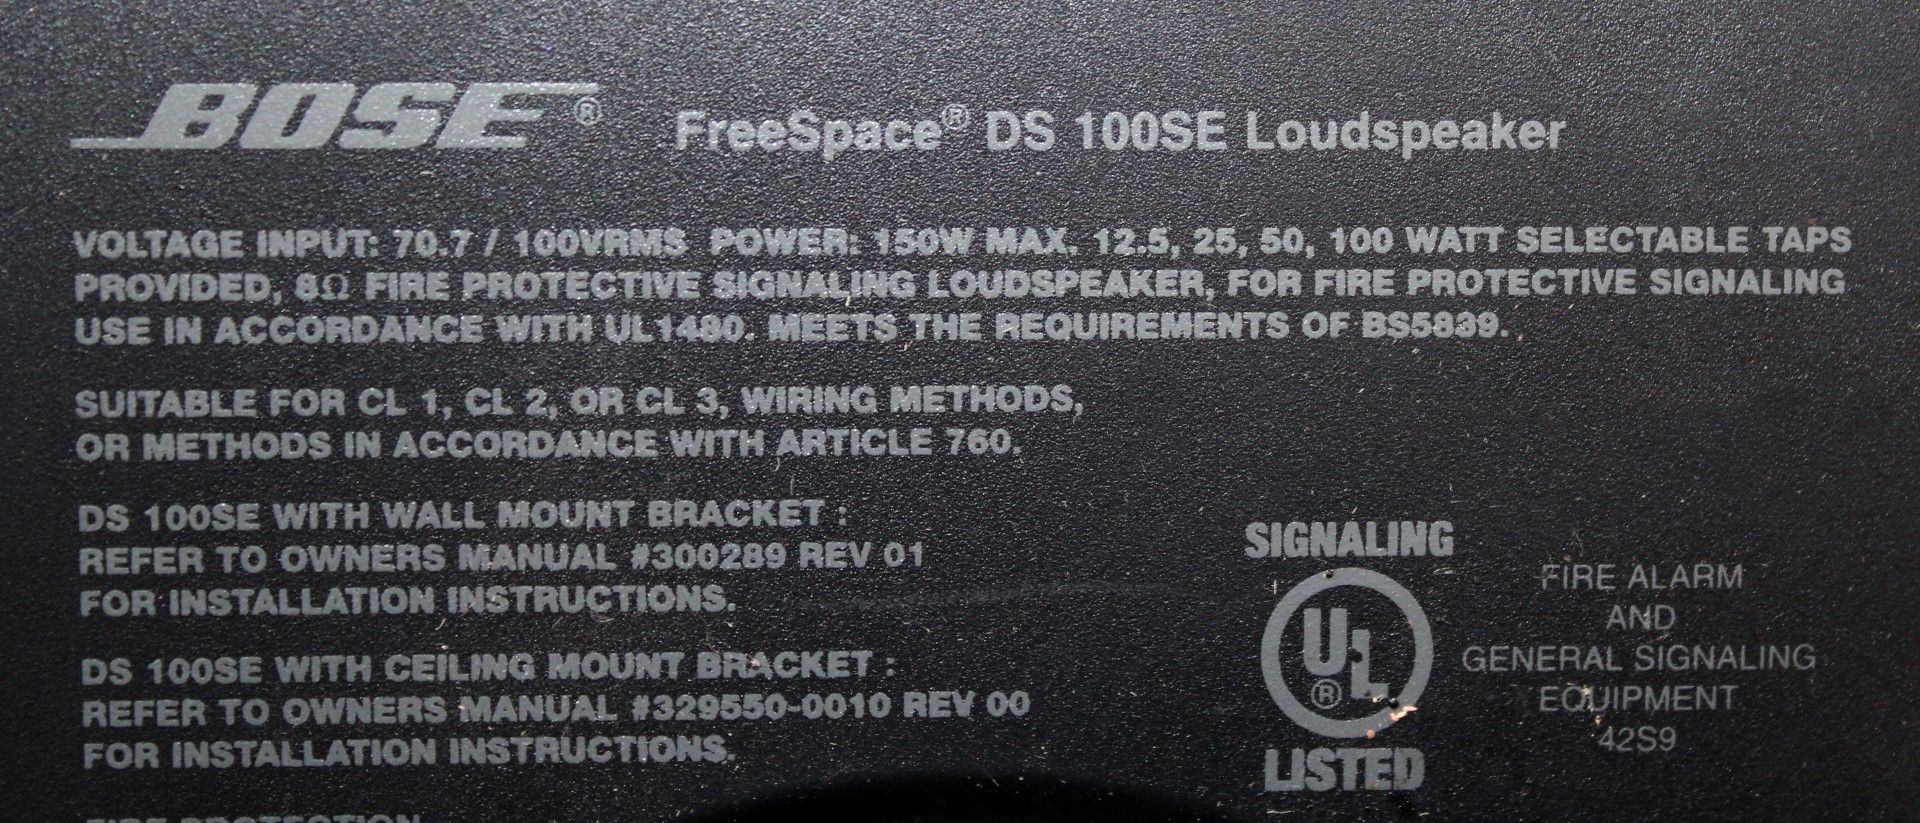 2 x Bose Freespace DS 100SE Loudspeakers - Professional Loudspeakers Suitable For The Homes, - Image 5 of 6